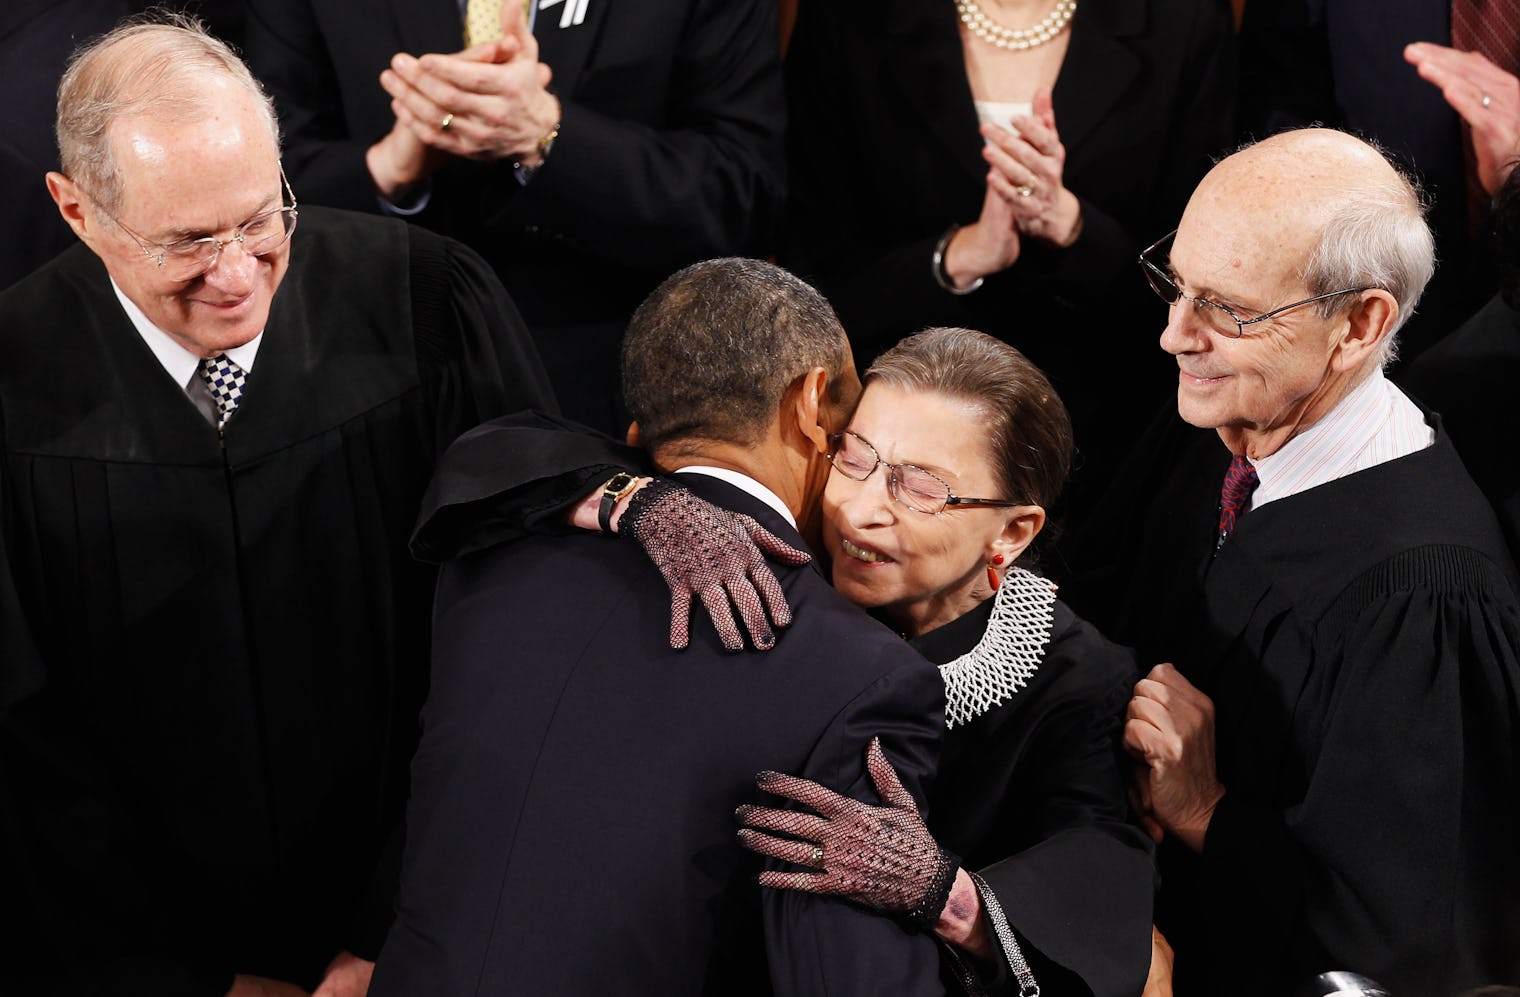 Ruth Bader Ginsburg S Georgetown Speech Recounted Her Days As A Flaming Feminist Litigator